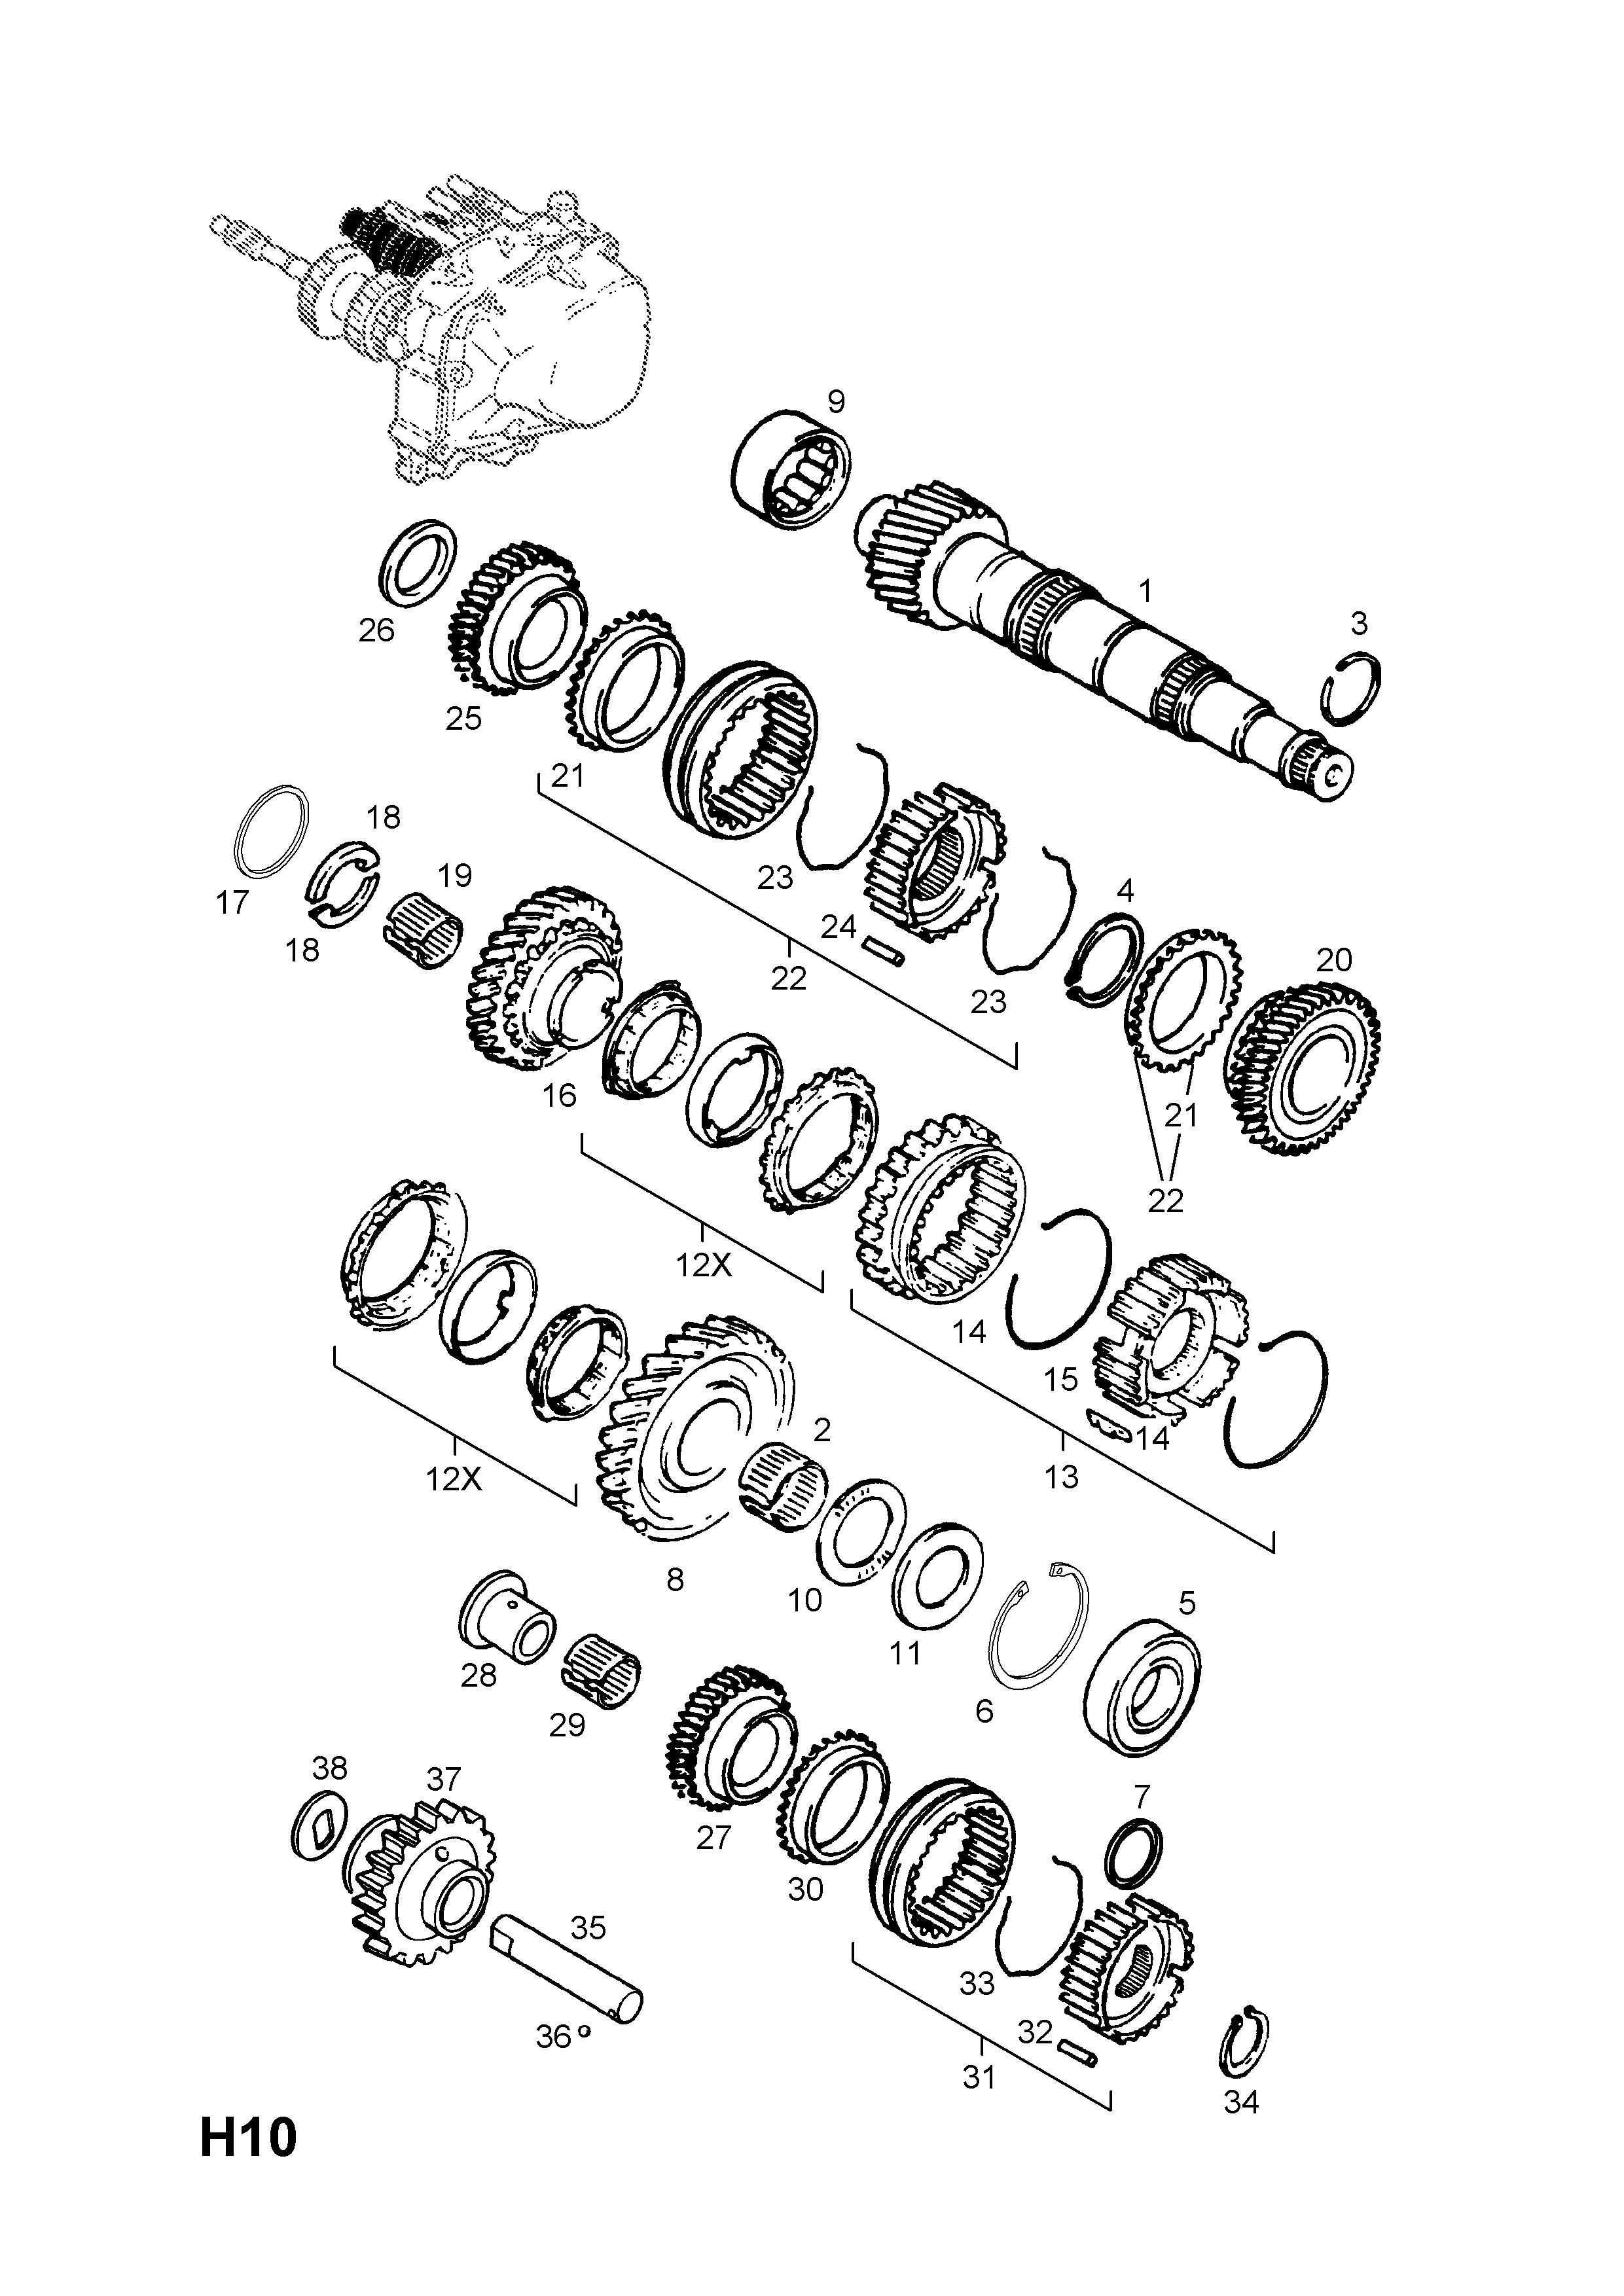 MAINSHAFT GEARS <small><i>[FIRST AND SECOND GEARS]</i></small>